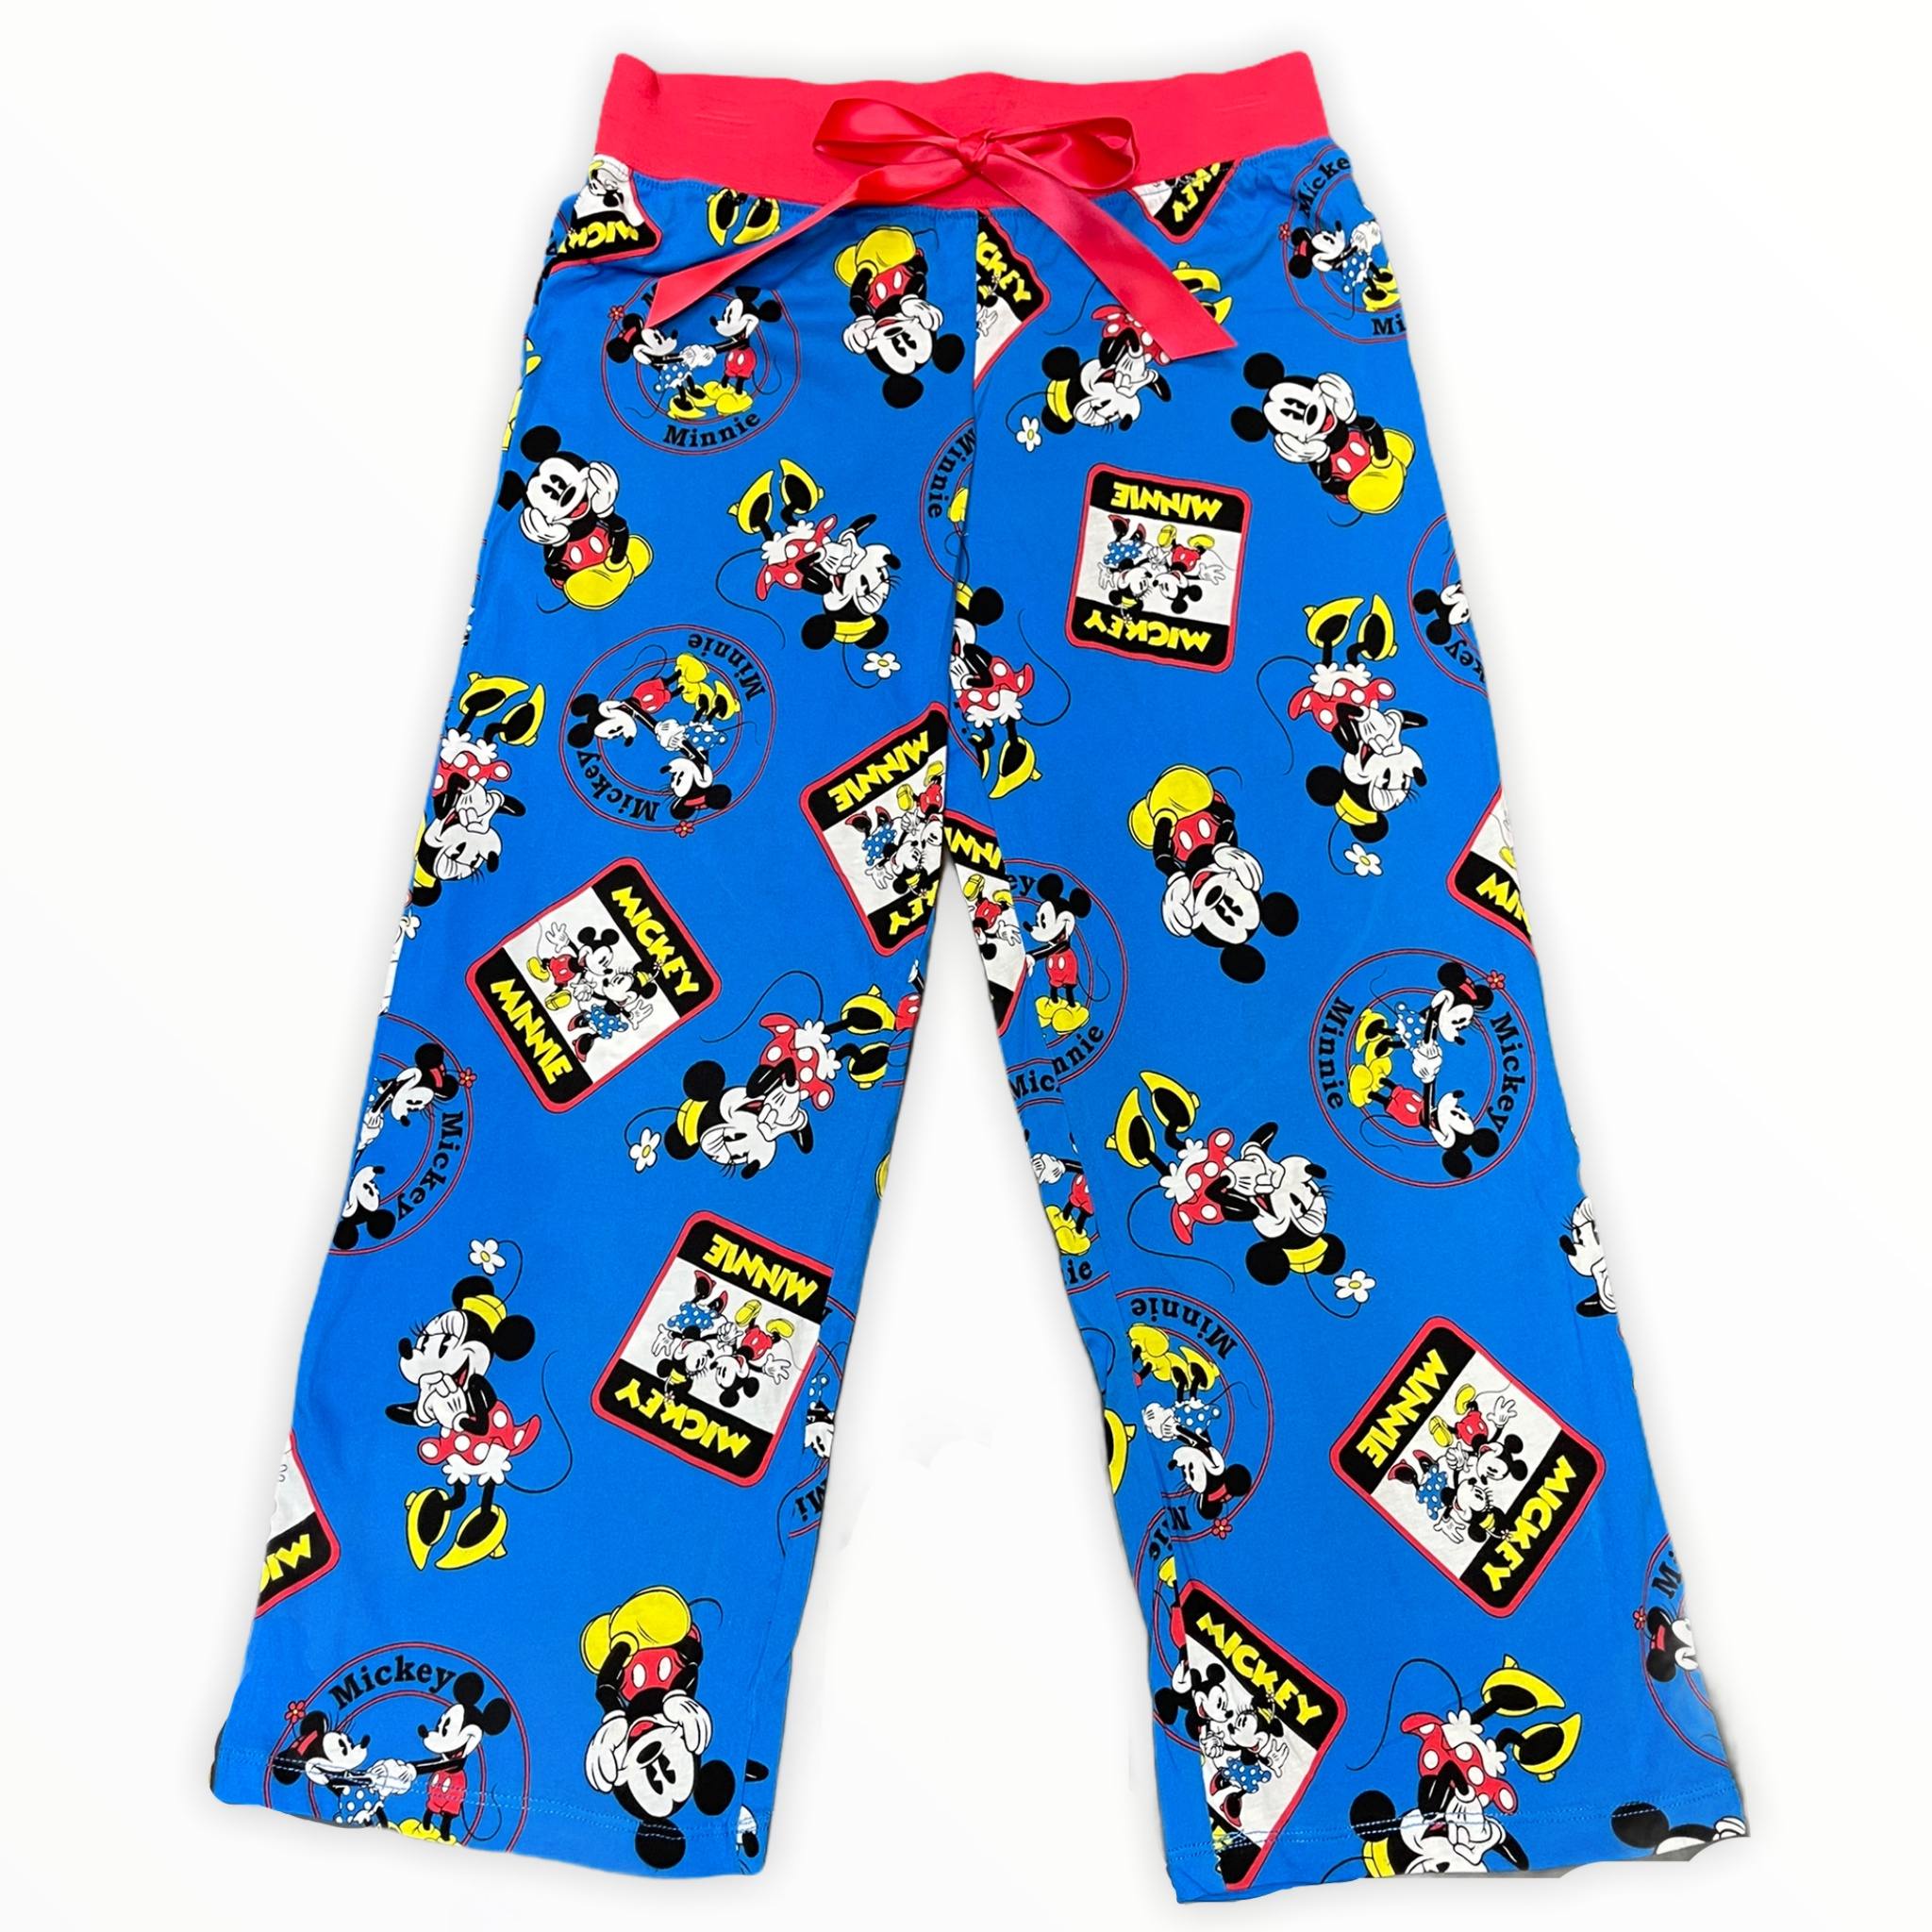 Boys' Sweatshirt & Pants Set with Mickey Mouse Design - ShopiPersia